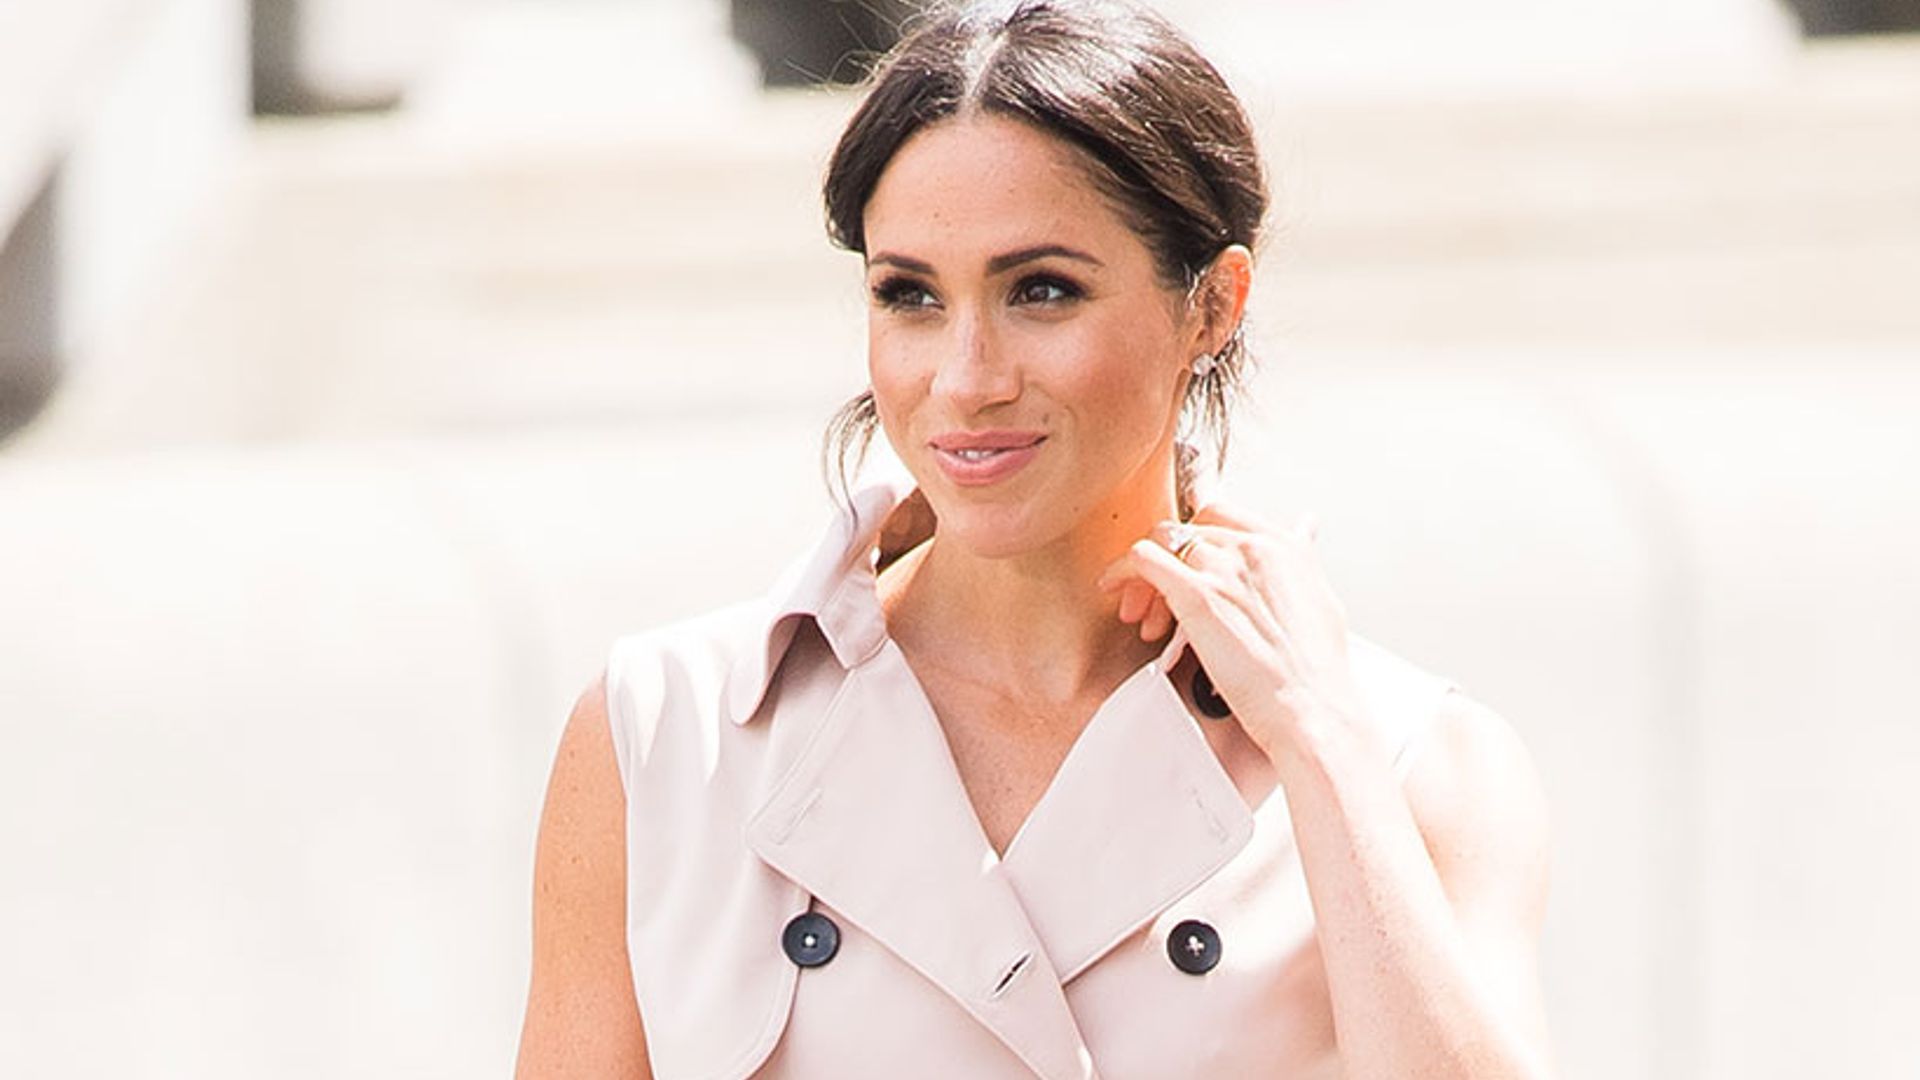 Revealed: the woman behind Meghan Markle's latest chic outfit